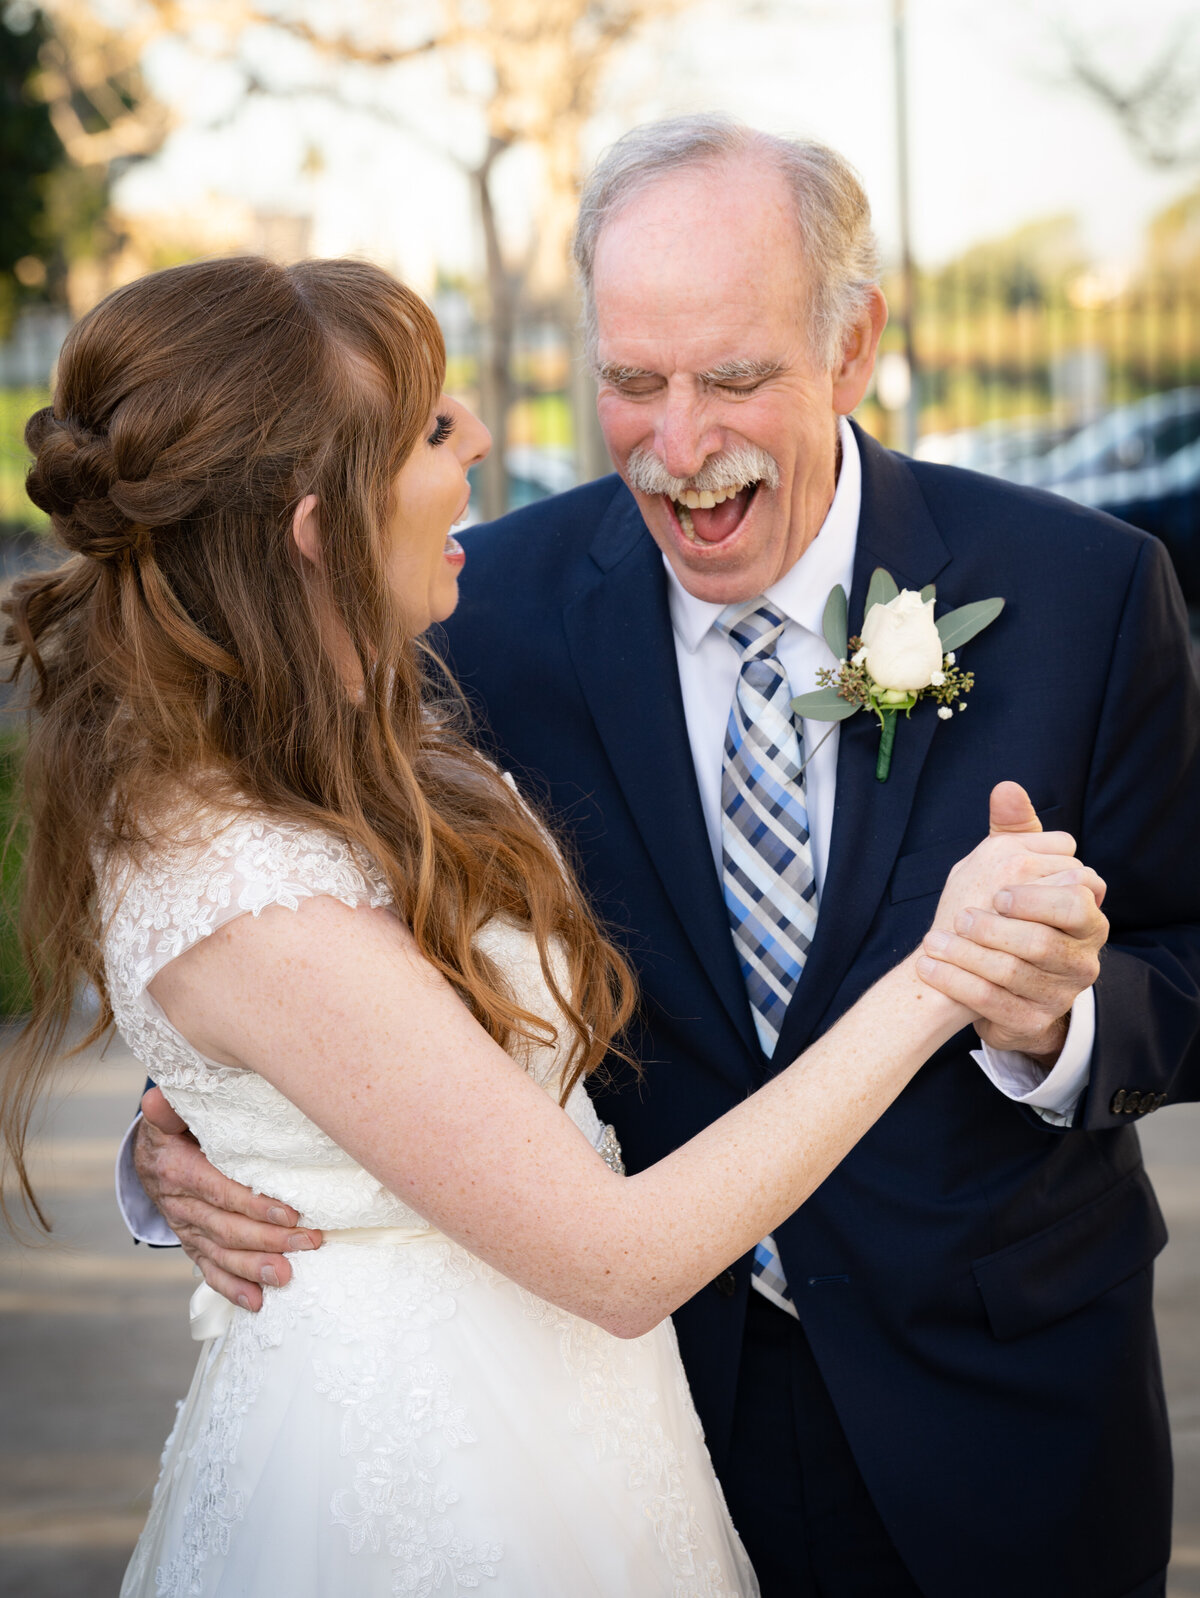 Elderly father in a navy suit with white-rose boutonniere holds red-headed daughter and laughs heartily with her during their special dance at her wedding. Photo by SAVI Photography - Photographer in Riverside